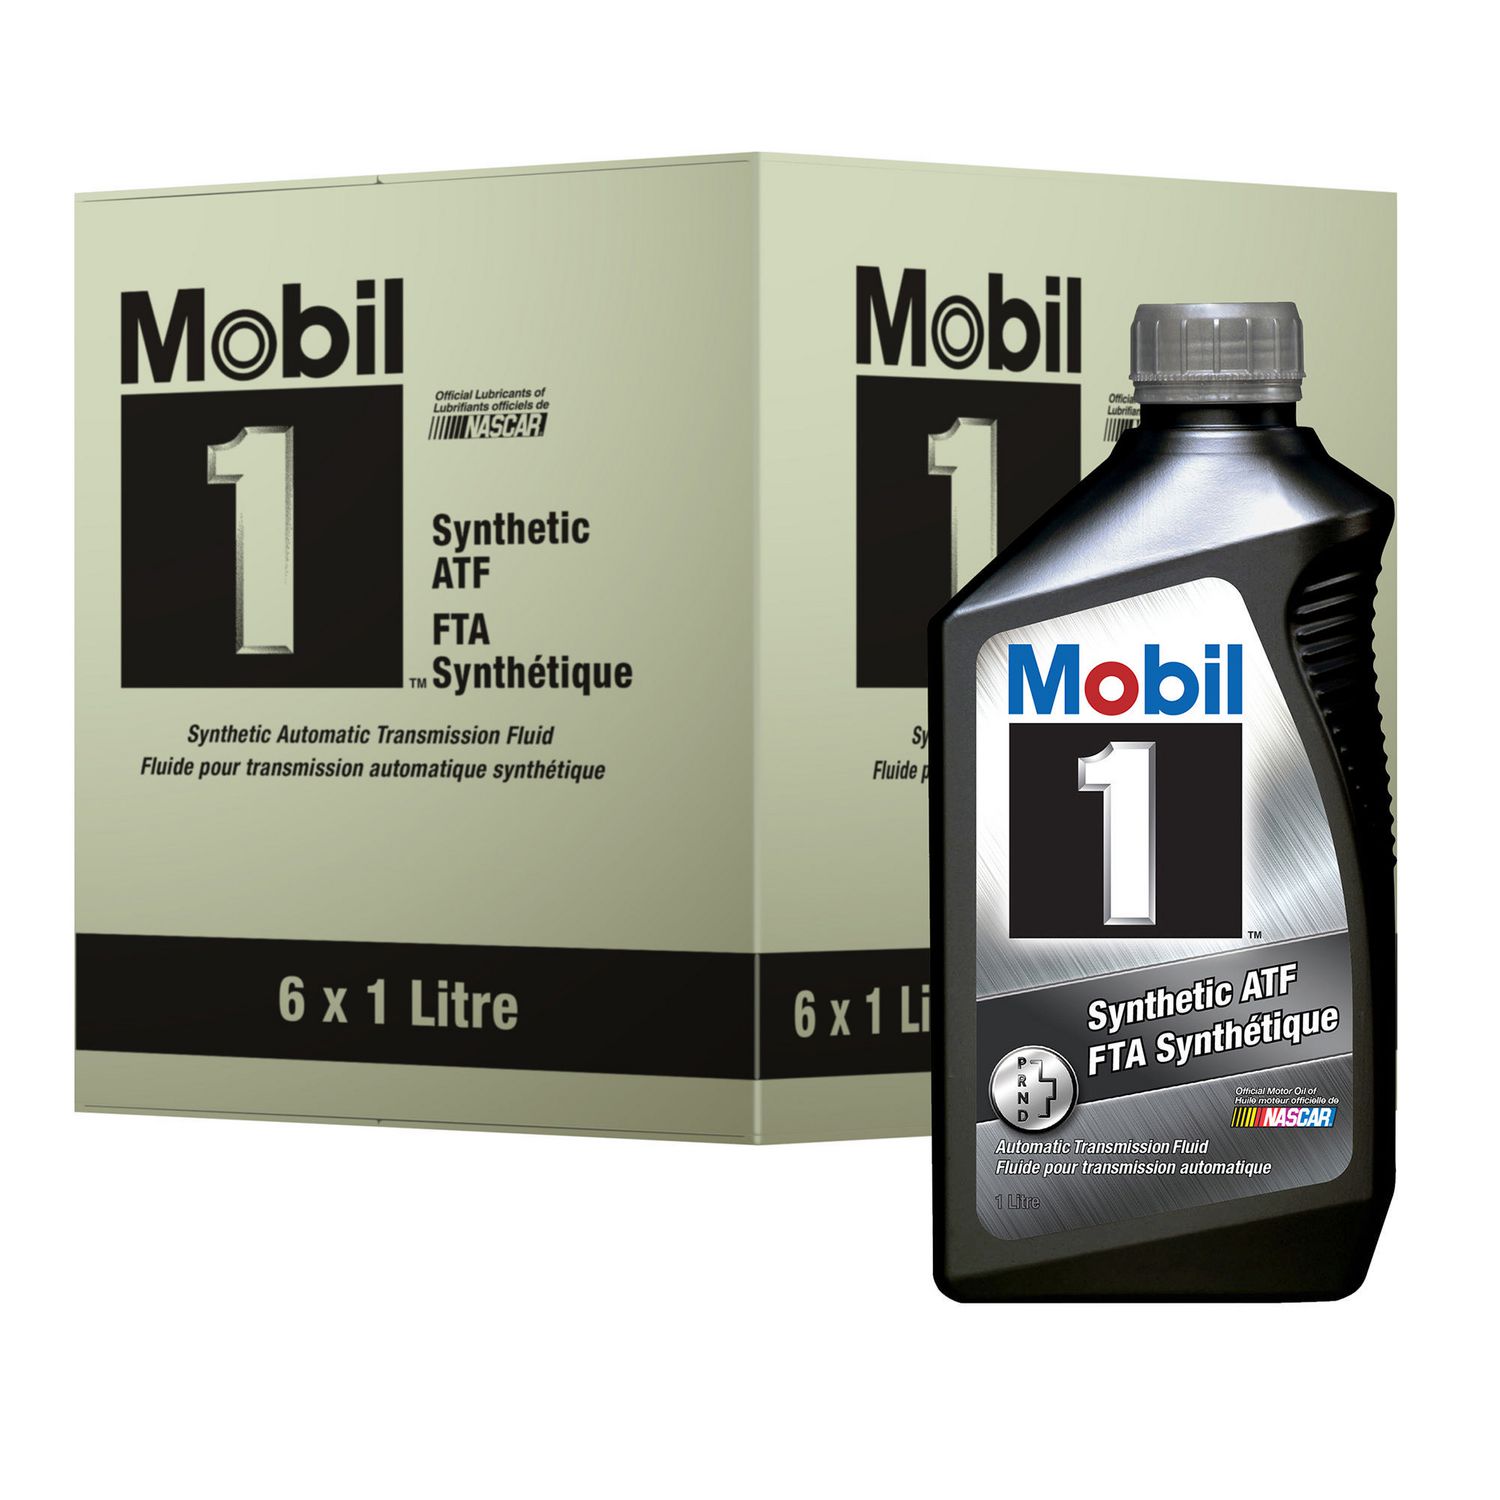 Mobil 1 atf. Mobil 1 Synthetic АТФ. Mobil 1 syn ATF, кг. GM трансмиссия синтетика. Mobil Fluid 93.